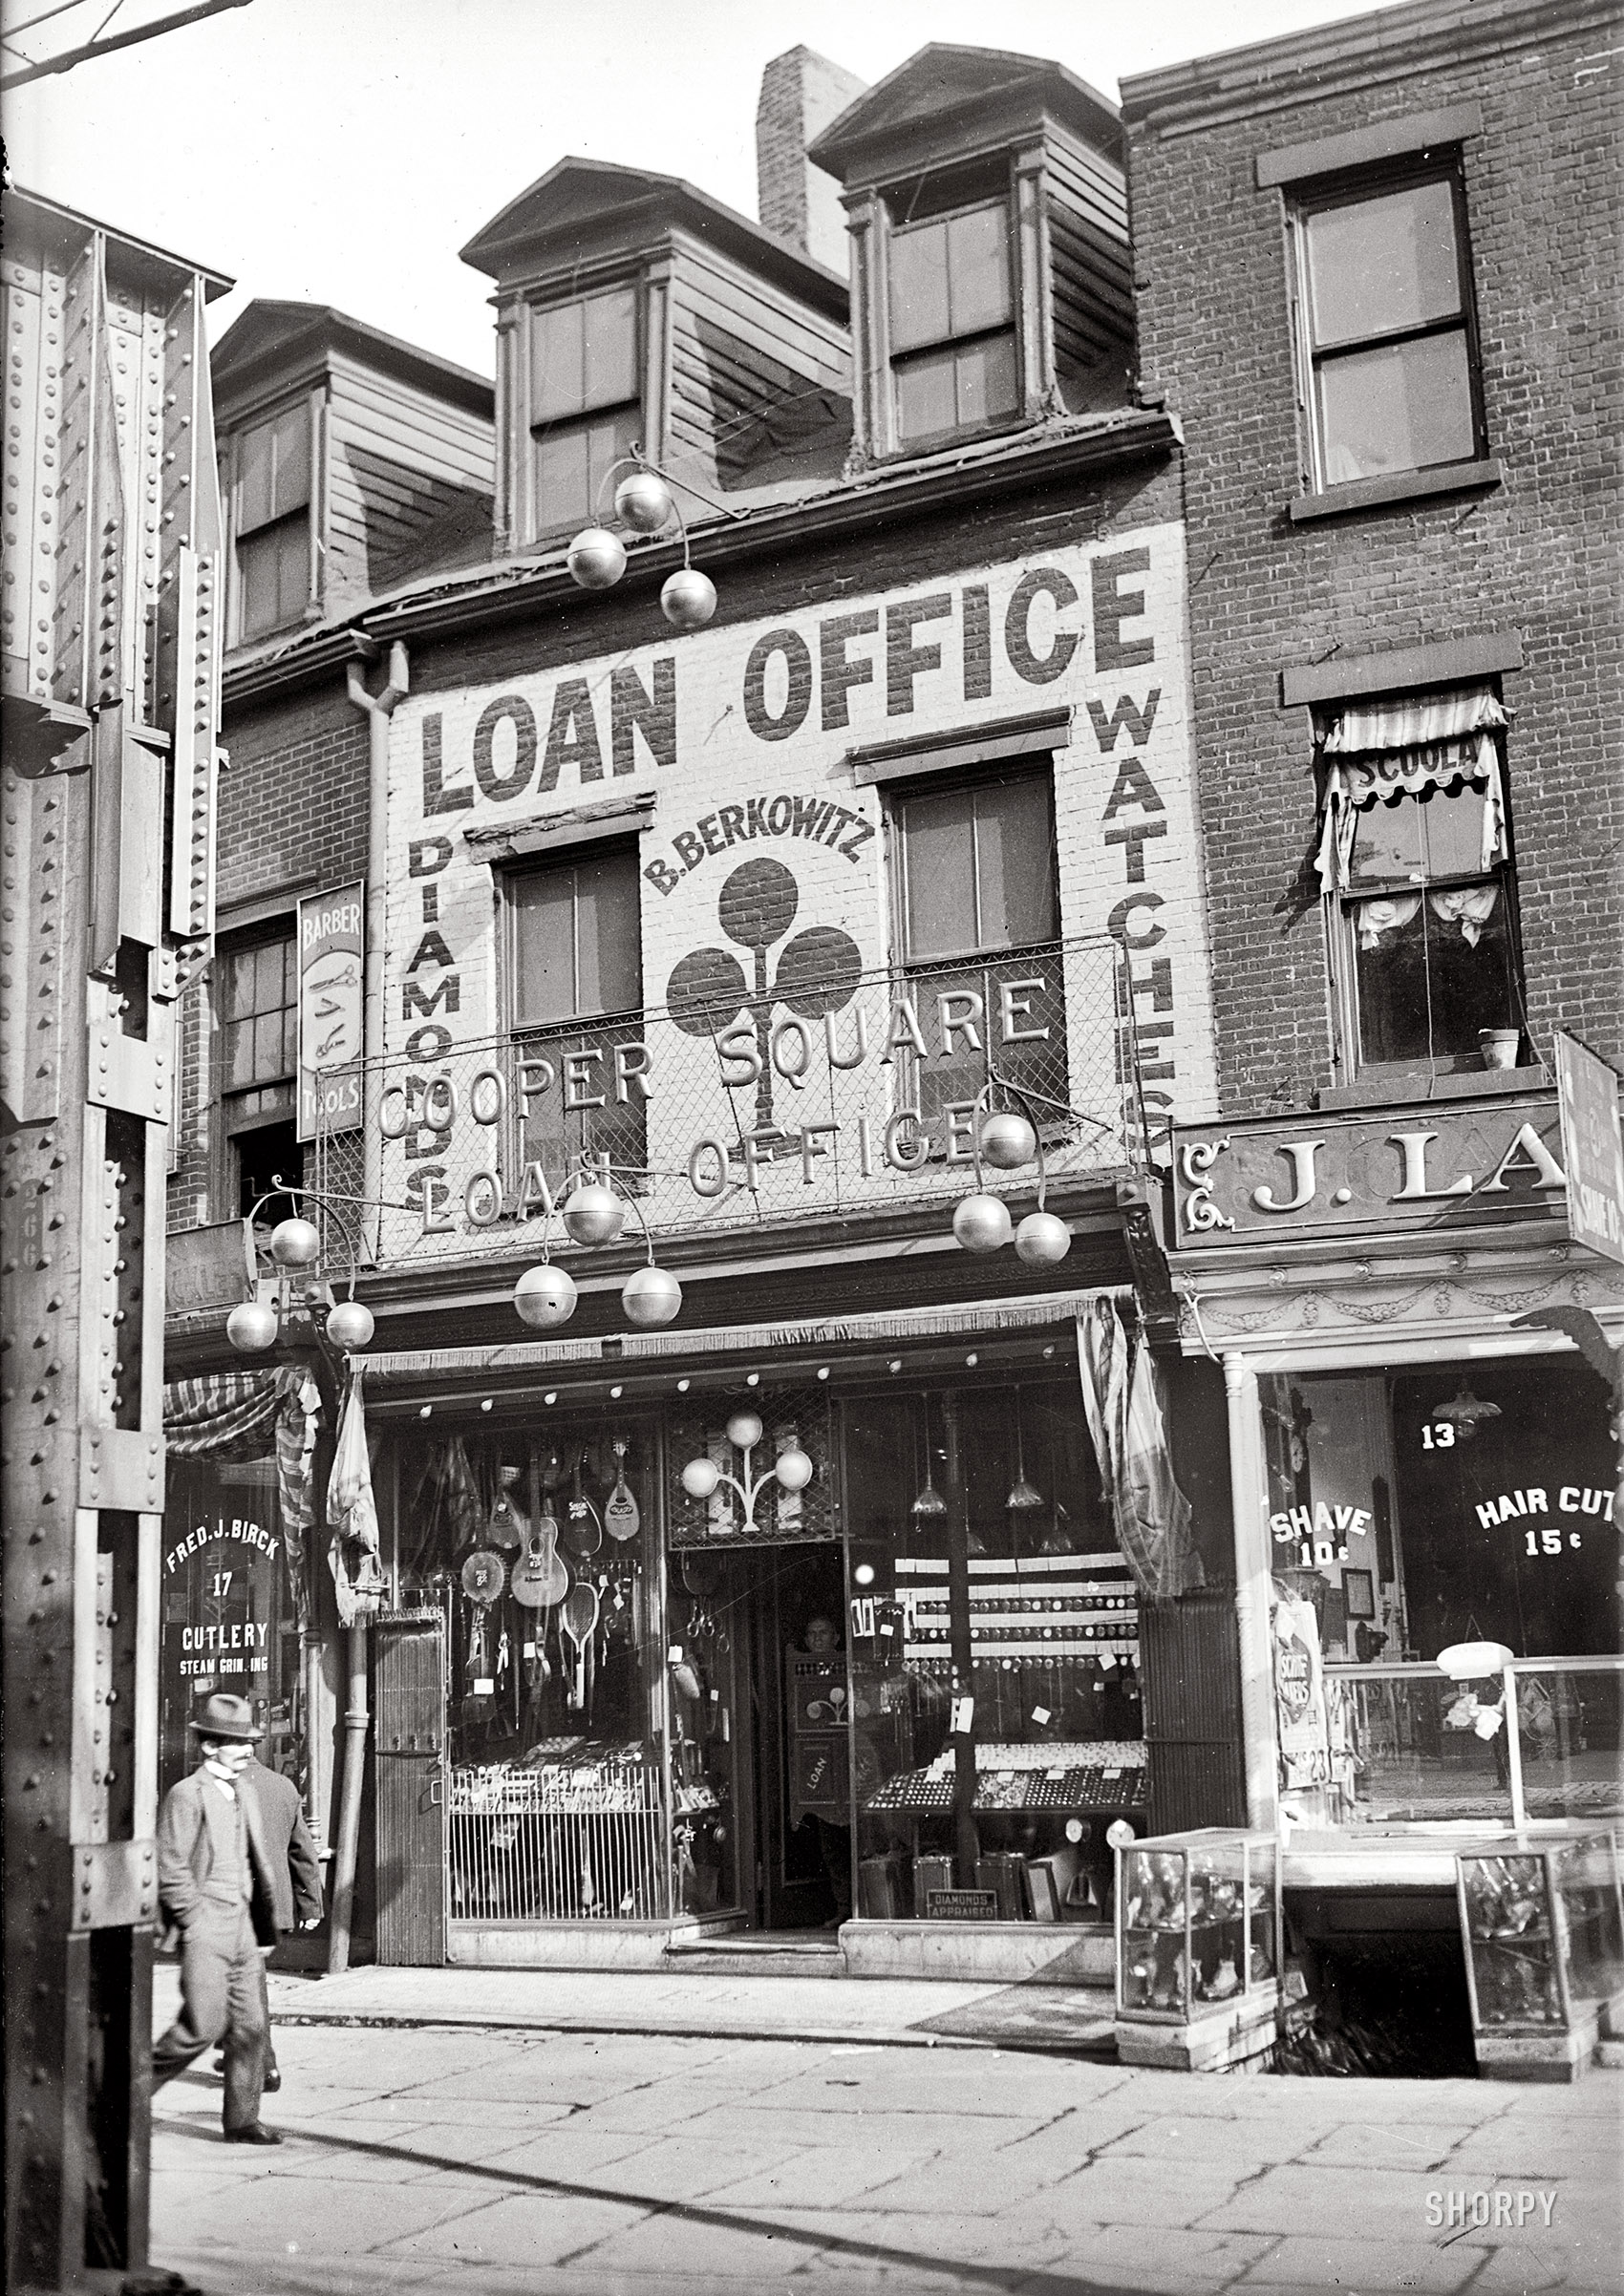 A pawn shop at No. 15 Cooper Square (thanks, Evan) in New York circa 1920. 5x7 glass negative, George Grantham Bain Collection. View full size.